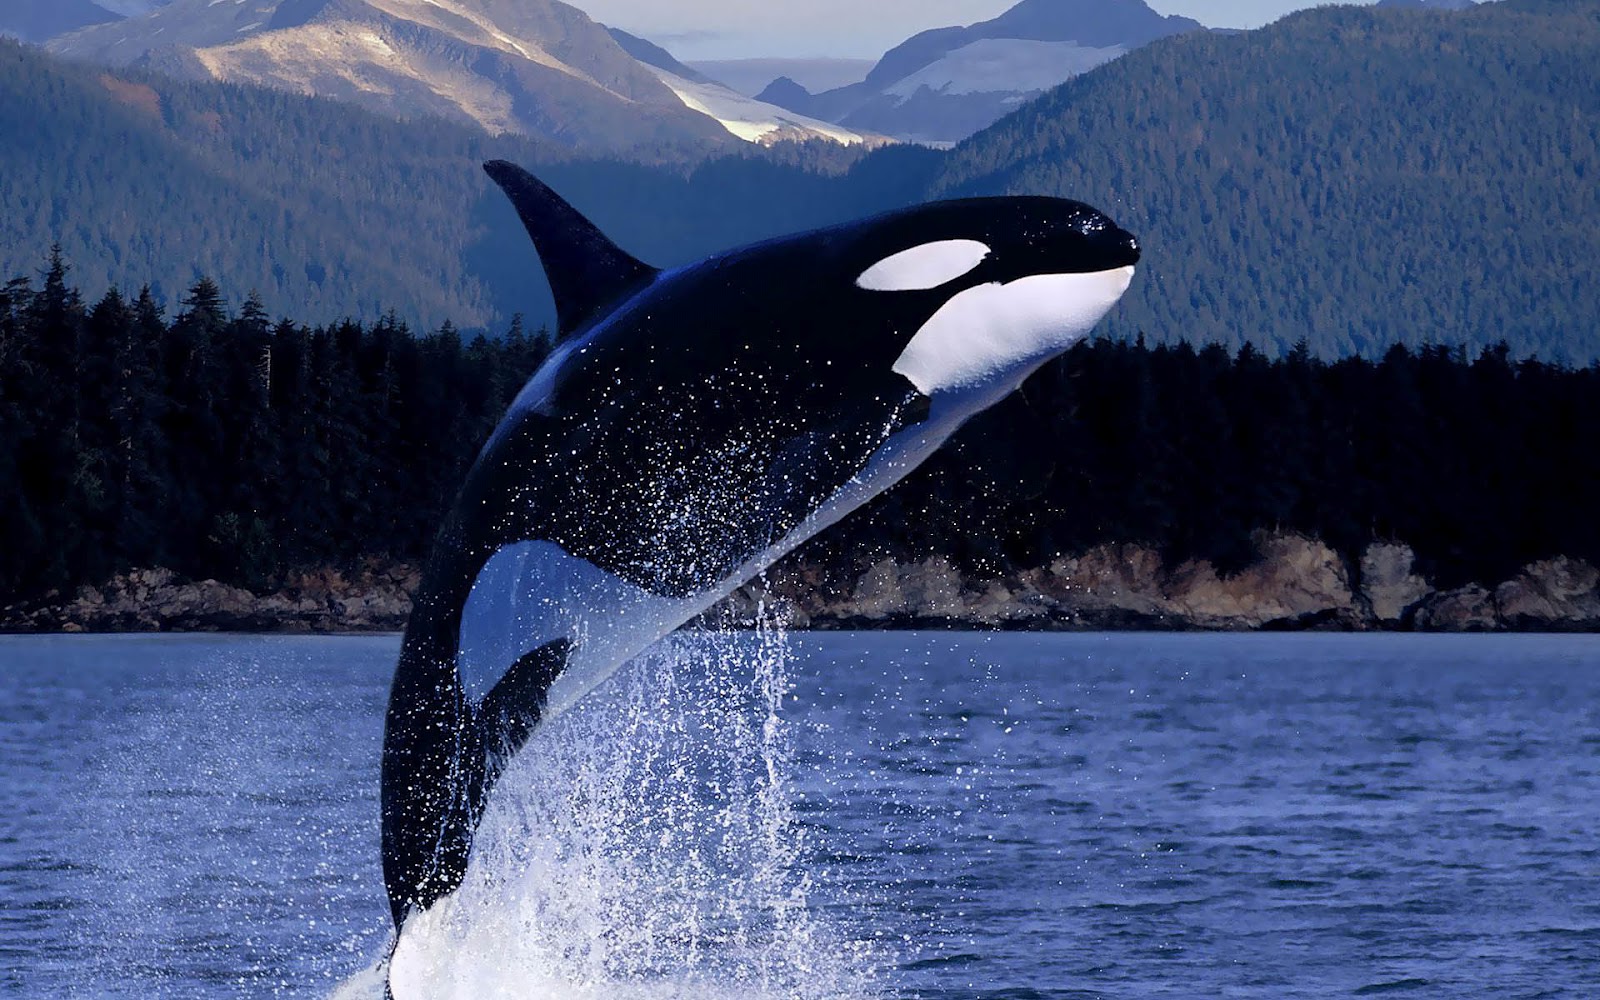 HD Orca Killer Whale Wallpaper With A Jumping Out Of